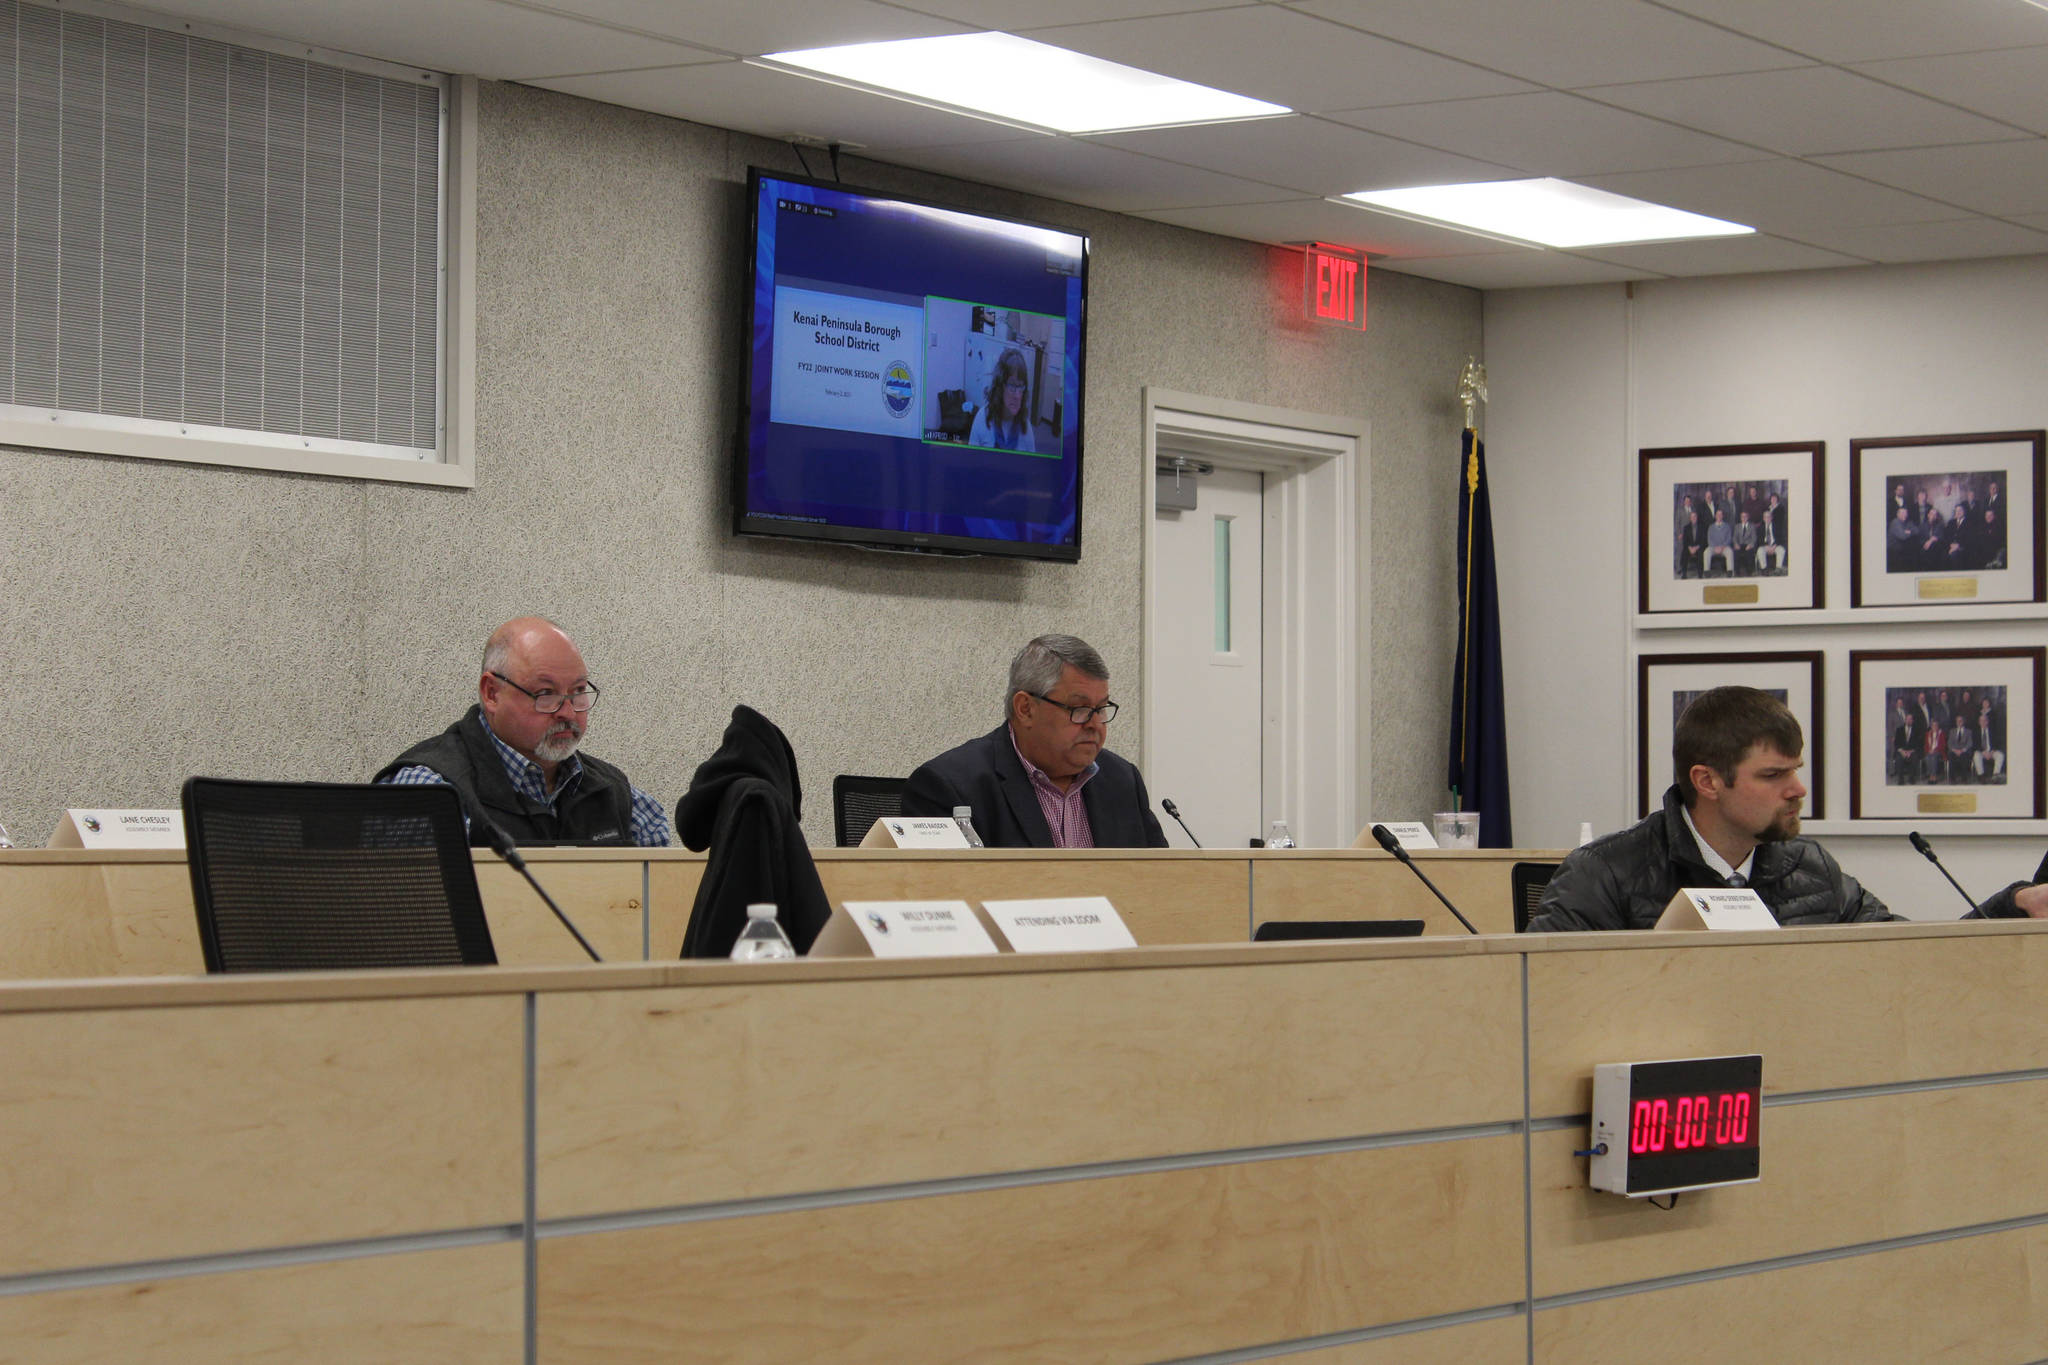 Kenai Peninsula Borough Administration and Assembly meet for a joint work session with the Kenai Peninsula Borough School District on Tuesday, Feb. 2, 2021.